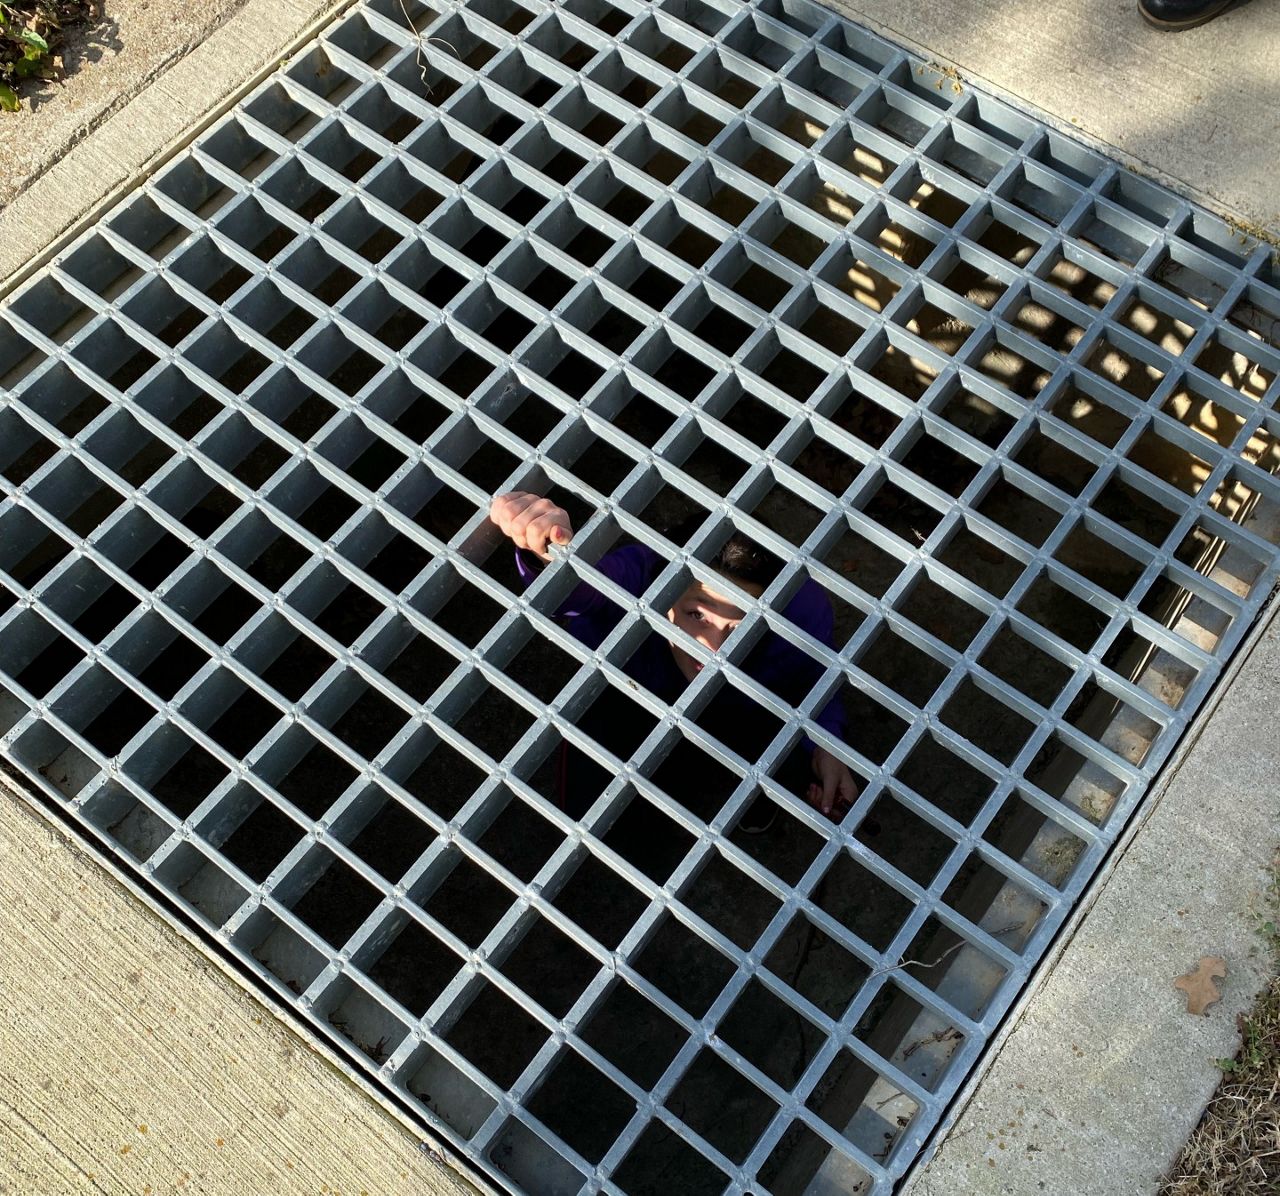 Twelve-year-old Tori appears beneath a sewage grate in Southlake, Texas, in this image from January 2022. (Southlake DPS)